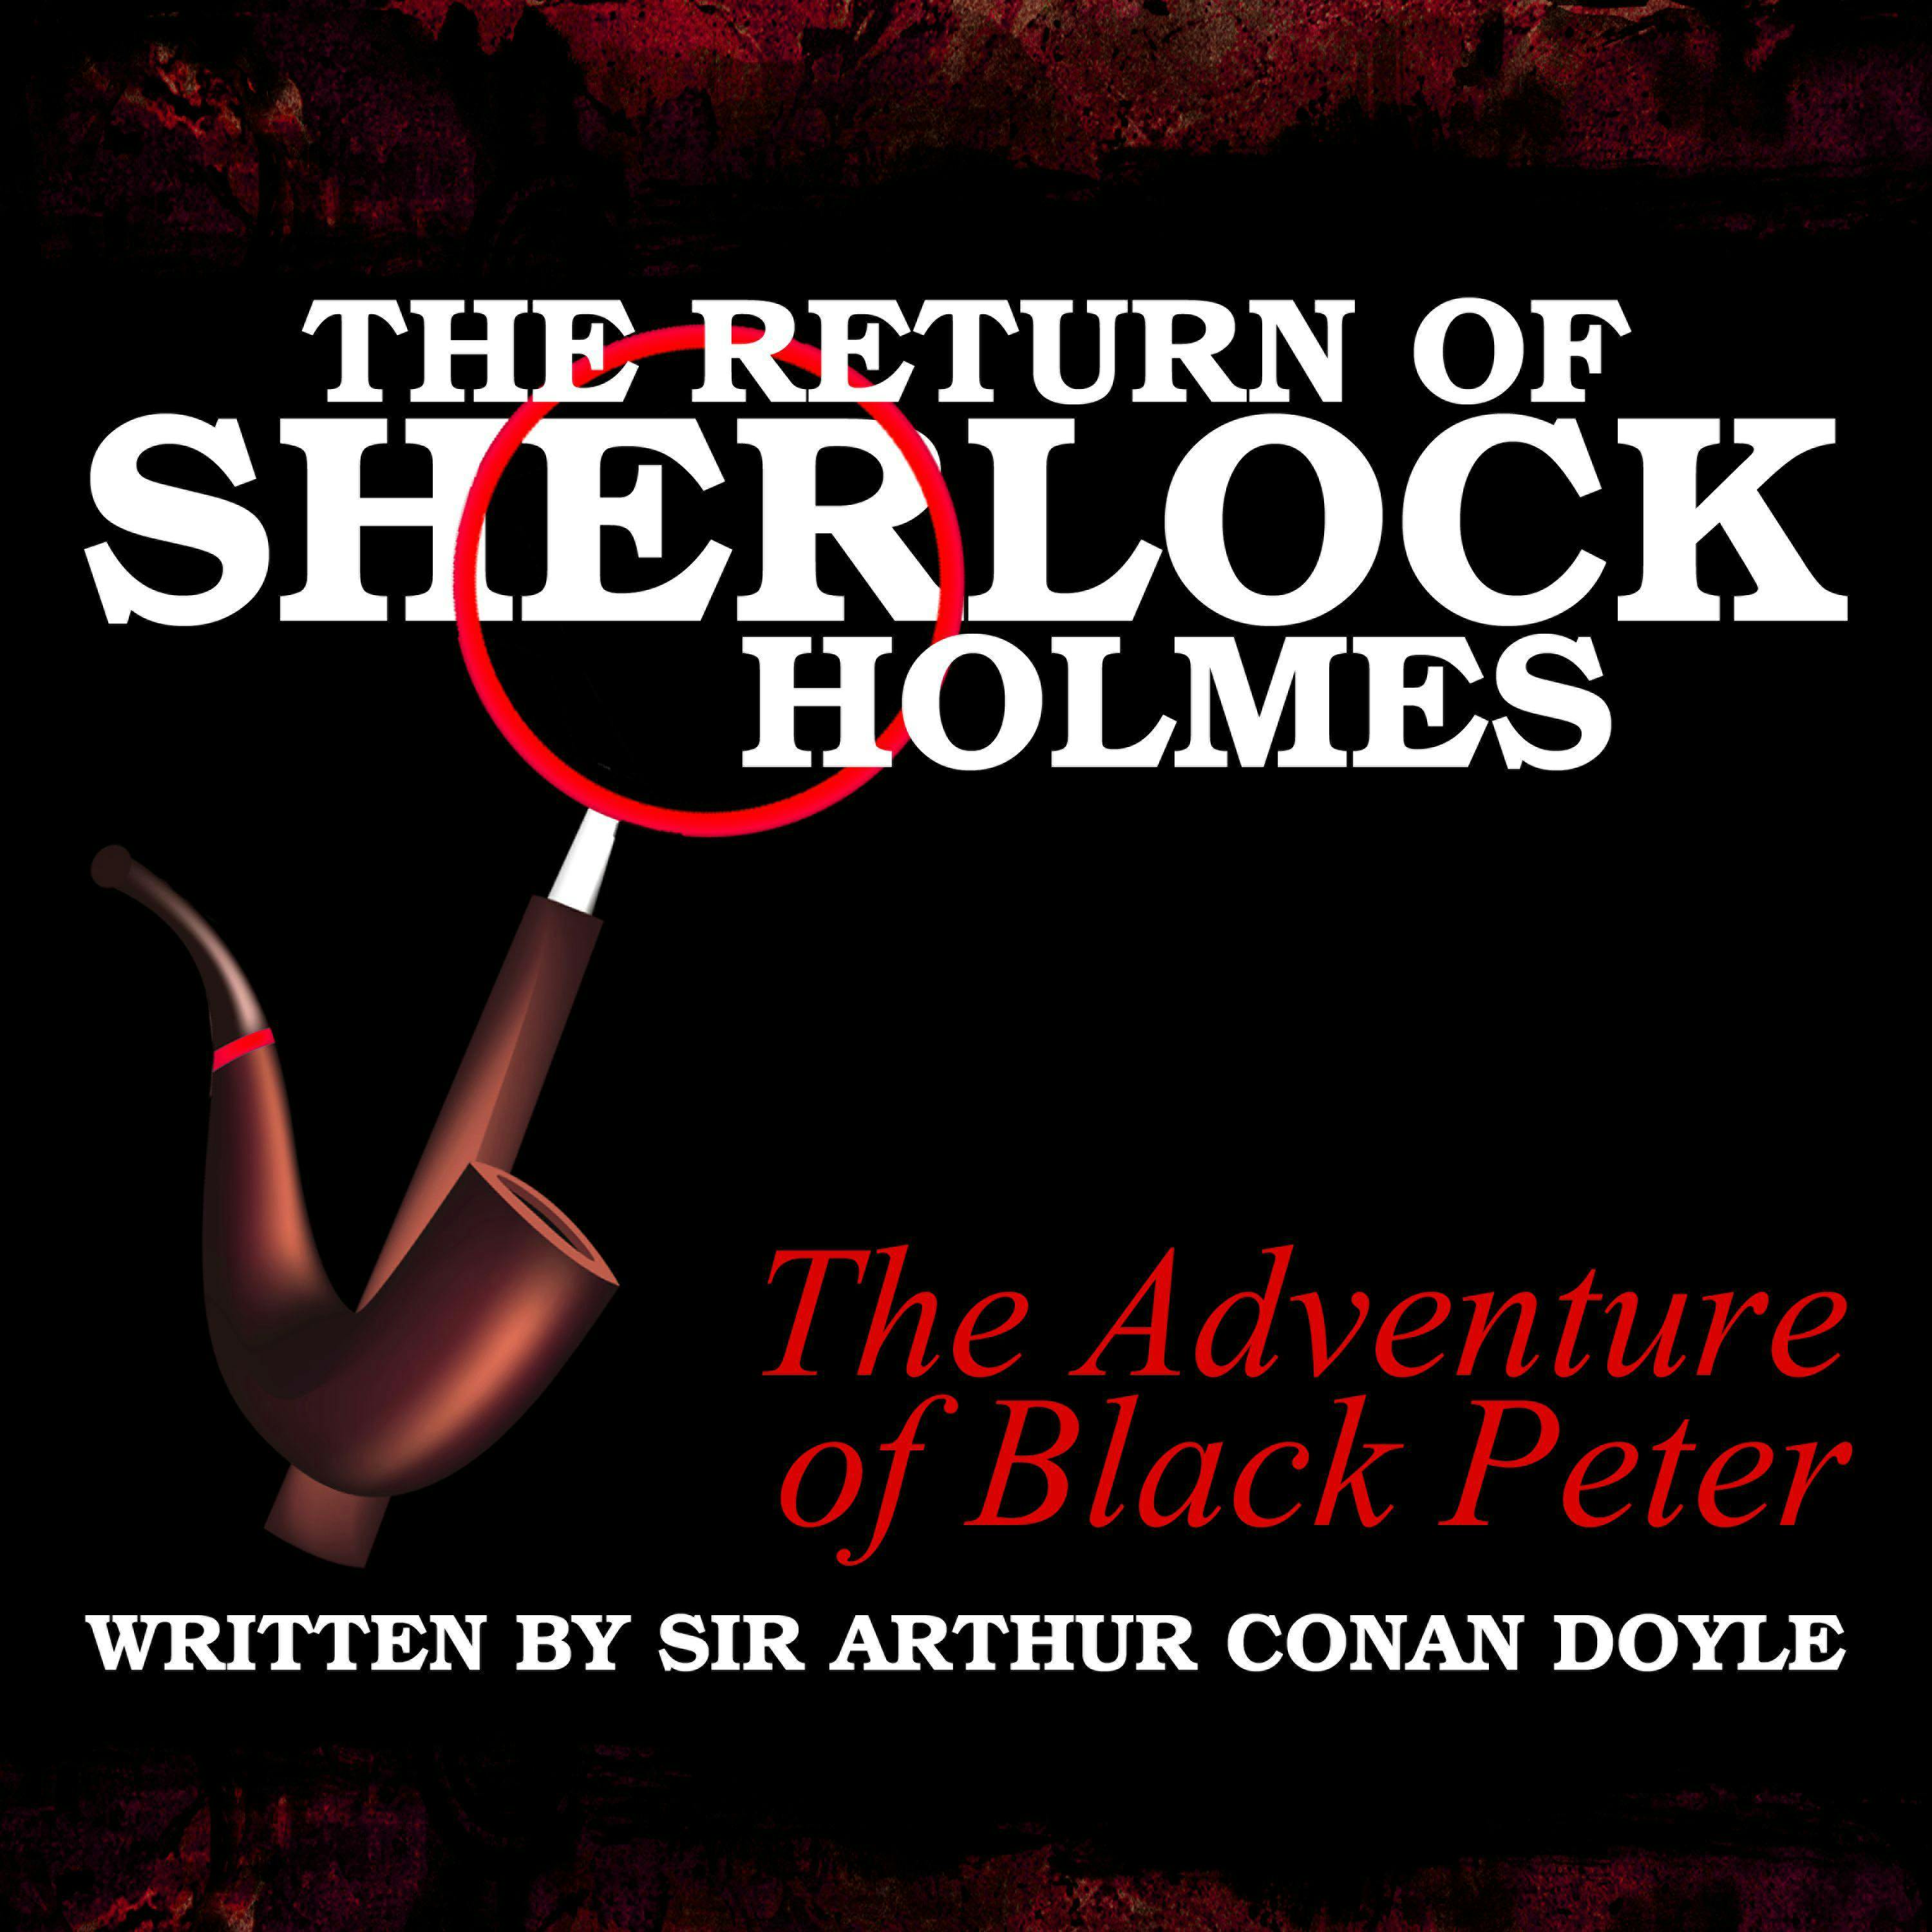 The Return of Sherlock Holmes: The Adventure of Black Peter - undefined